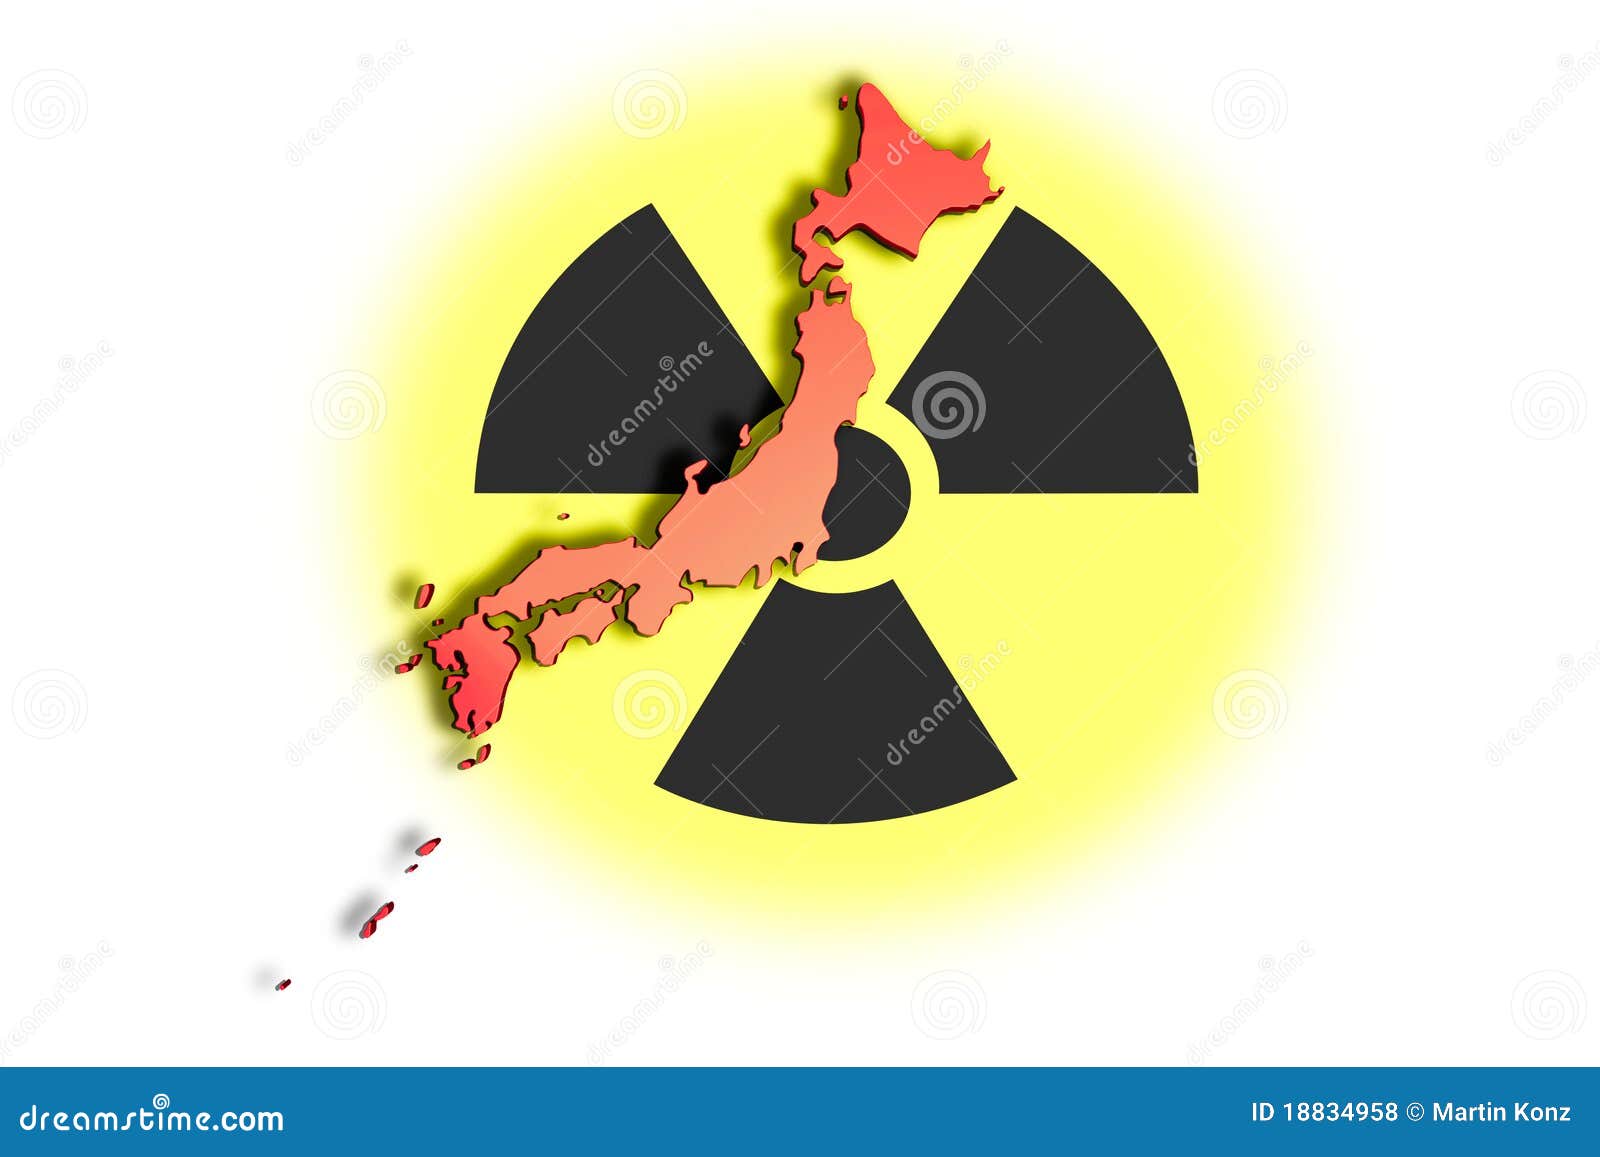 japan nuclear disaster 01